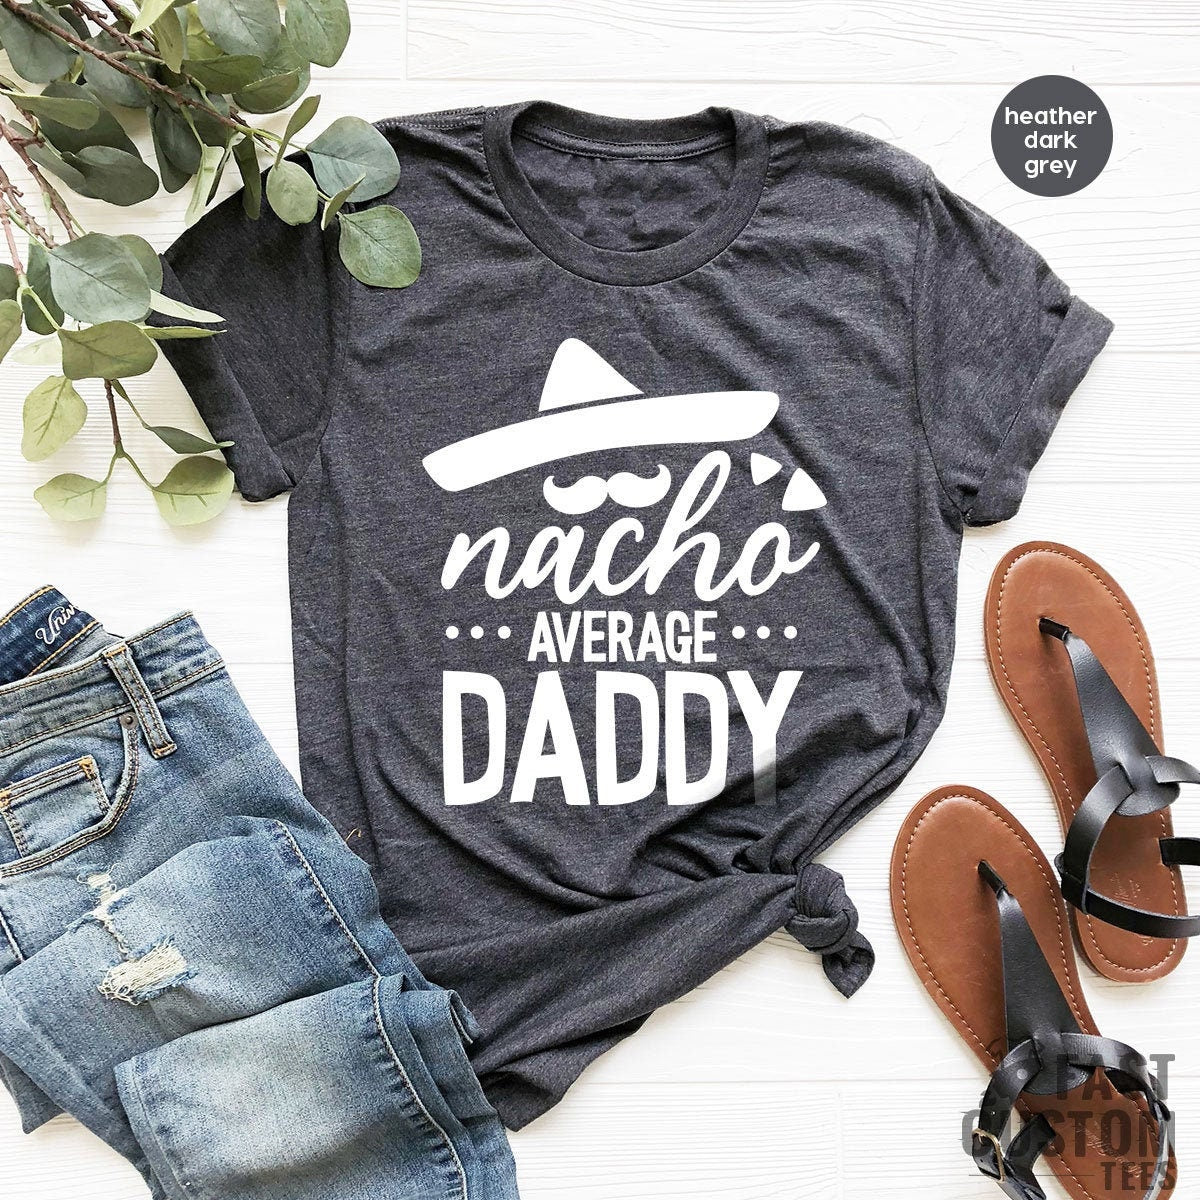 Dad Shirt, Gift For Dad, Nacho Dad Shirt, Nacho Daddy Average, Fathers Day Shirt, Fathers Day Gift, Fieasta Dad Shirt - Fastdeliverytees.com